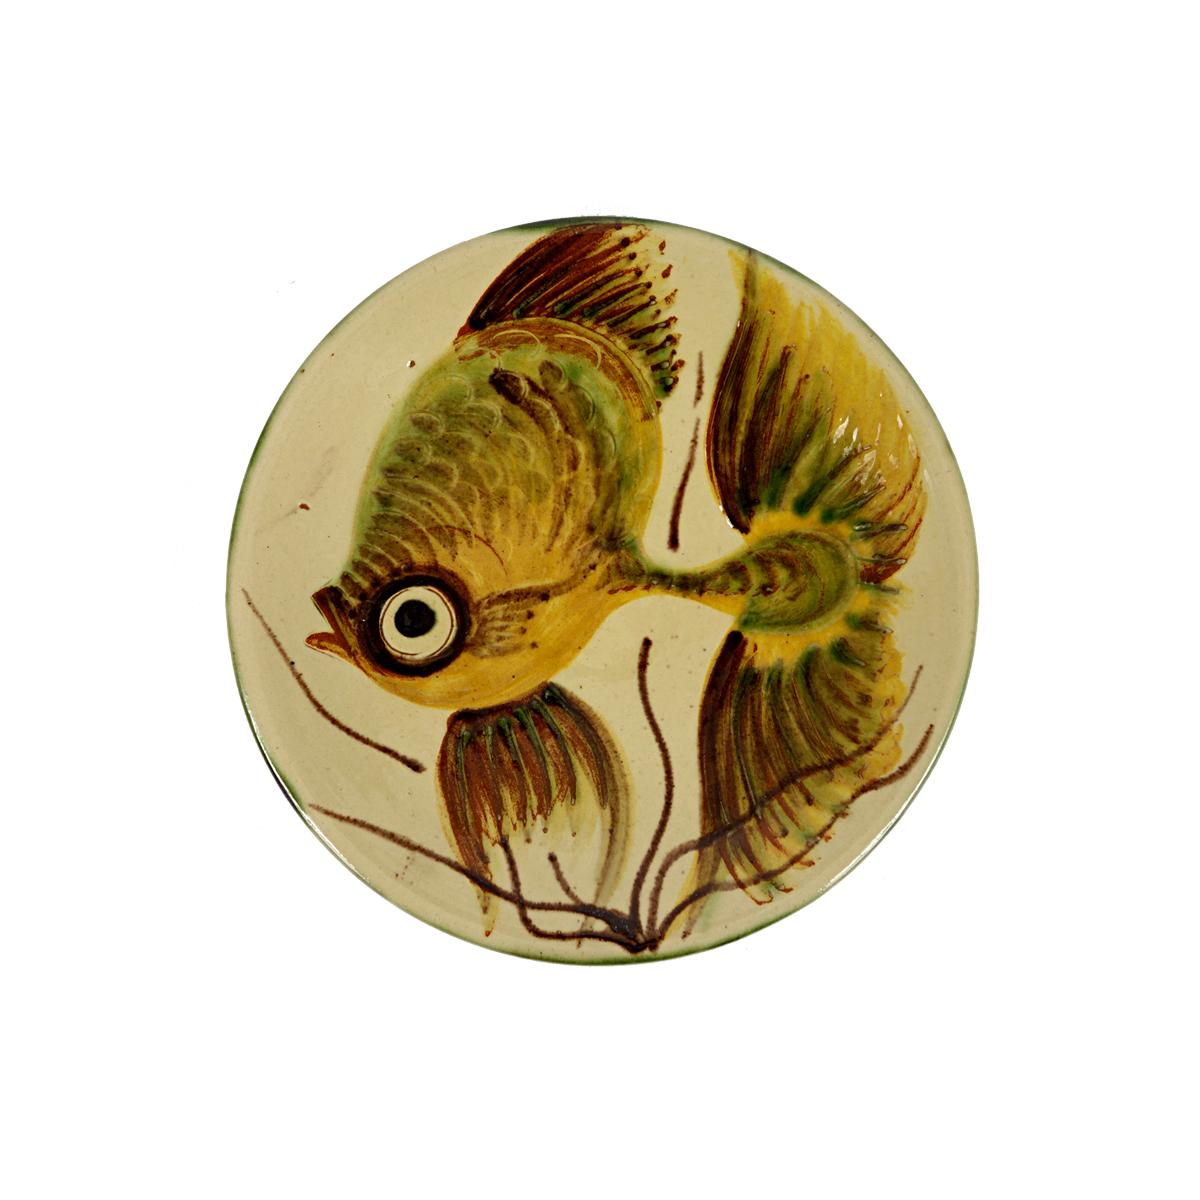 Very colorful and decorative set of three ceramic wall plates with stylized fishes. Designed and made by Puigdemont of Spain.
The three plates all have a different diameter: 24, 28 and 35 cm respectively (9.5, 11 and 13.8 inch).